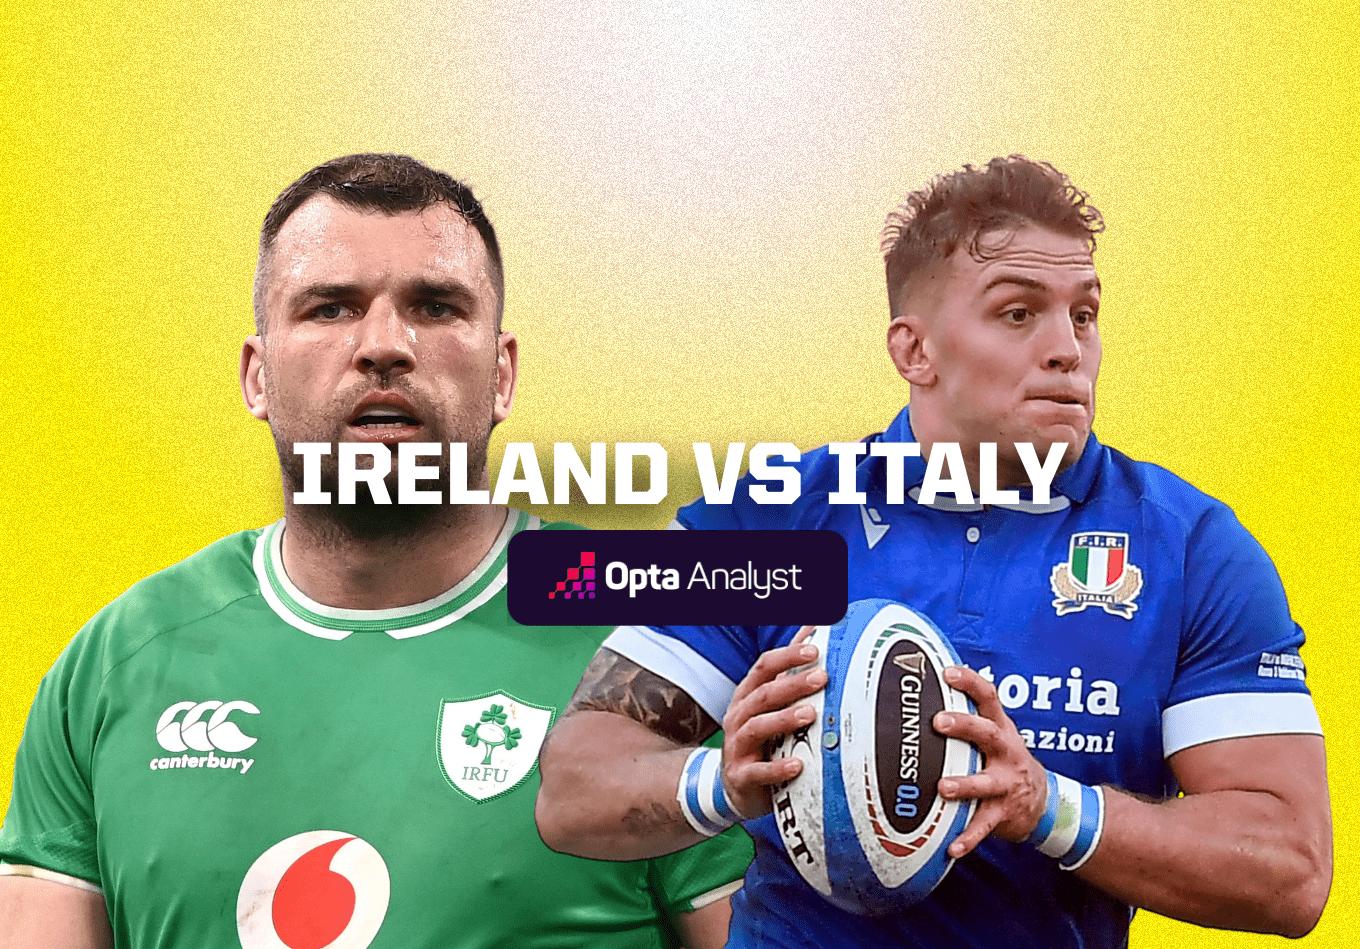 Ireland vs Italy Prediction and Preview